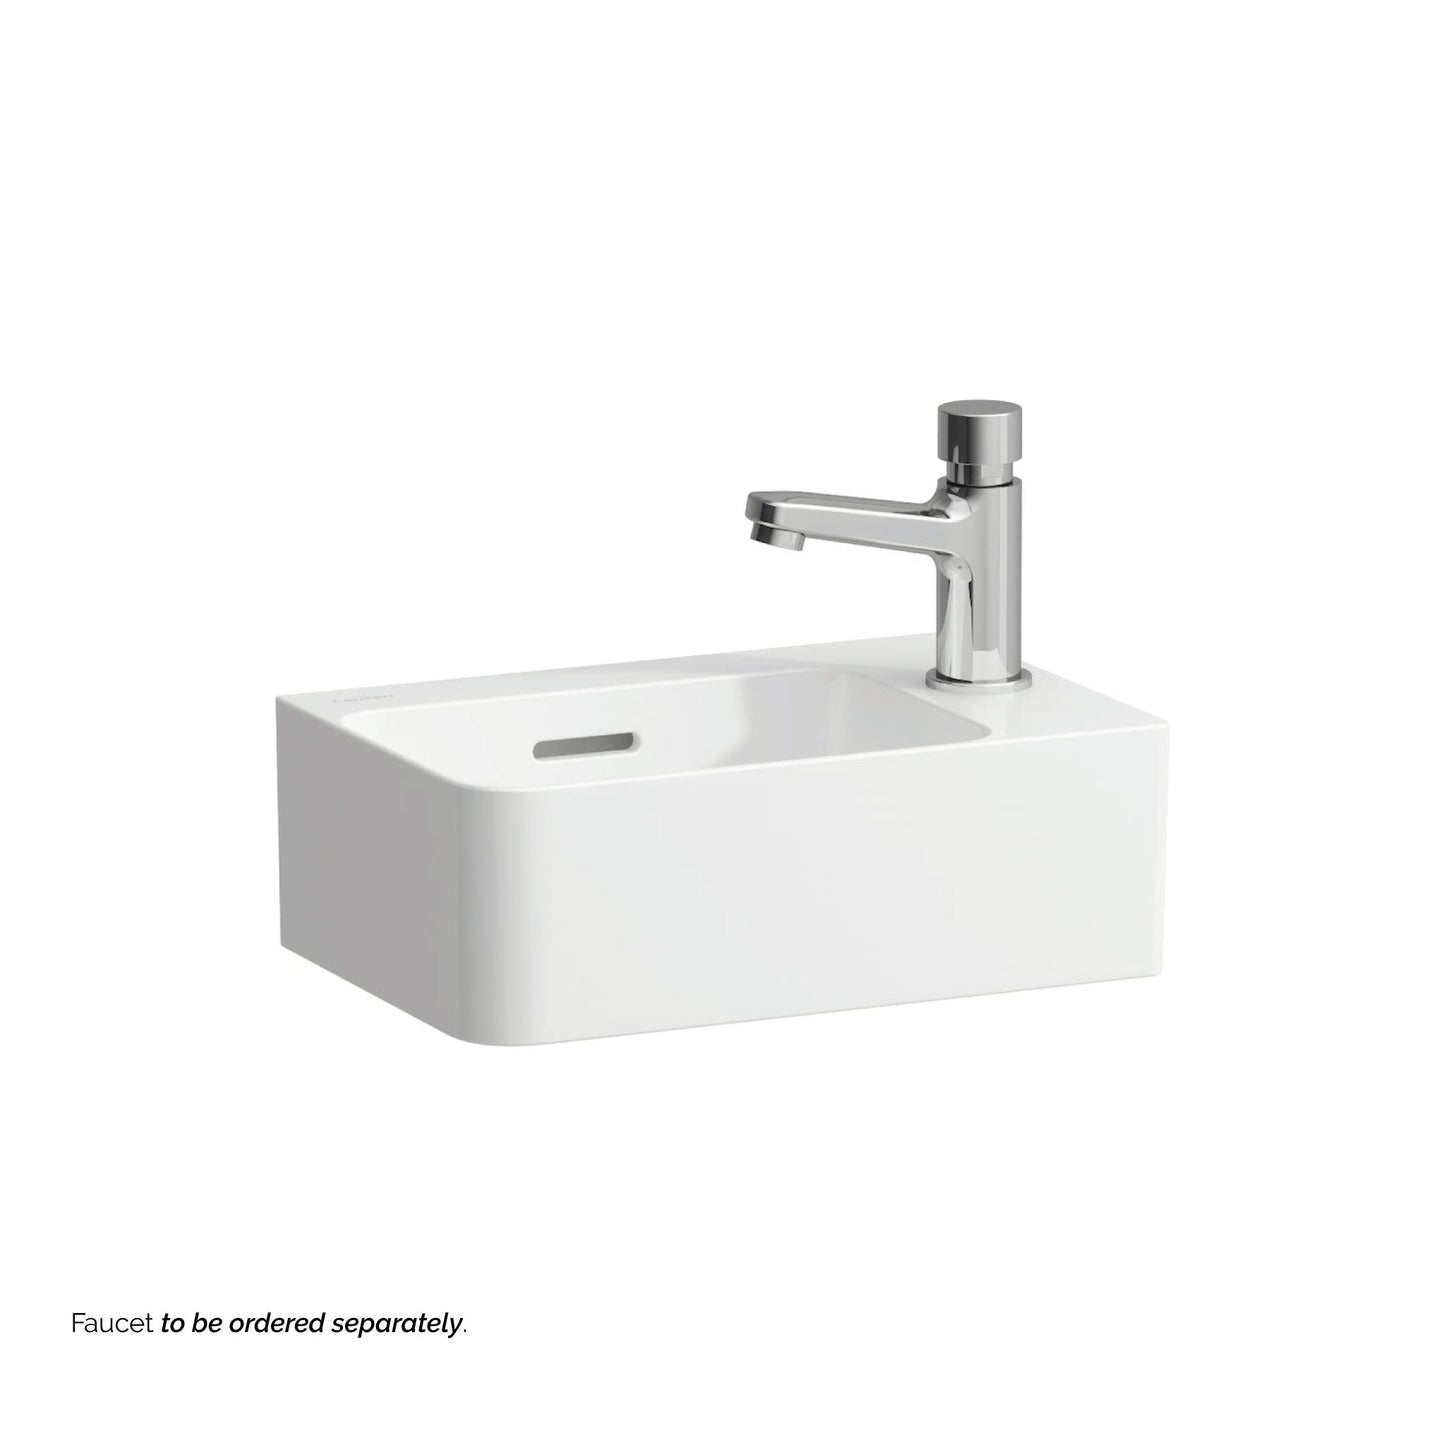 Laufen Val 13" x 9" White Ceramic Wall-Mounted Bathroom Sink With Faucet Hole on the Right